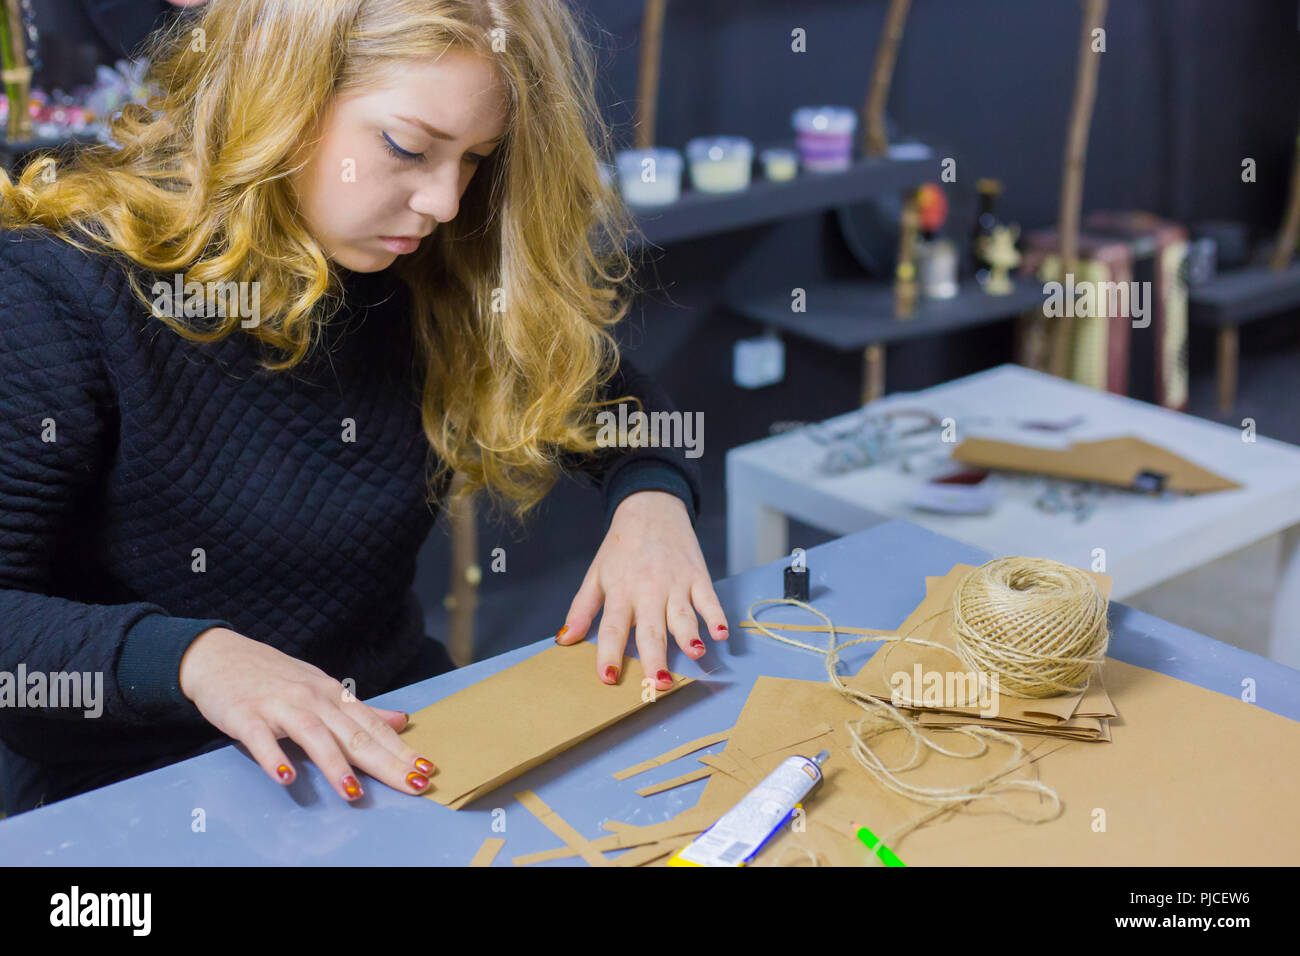 Professional woman decorator working with kraft paper Stock Photo